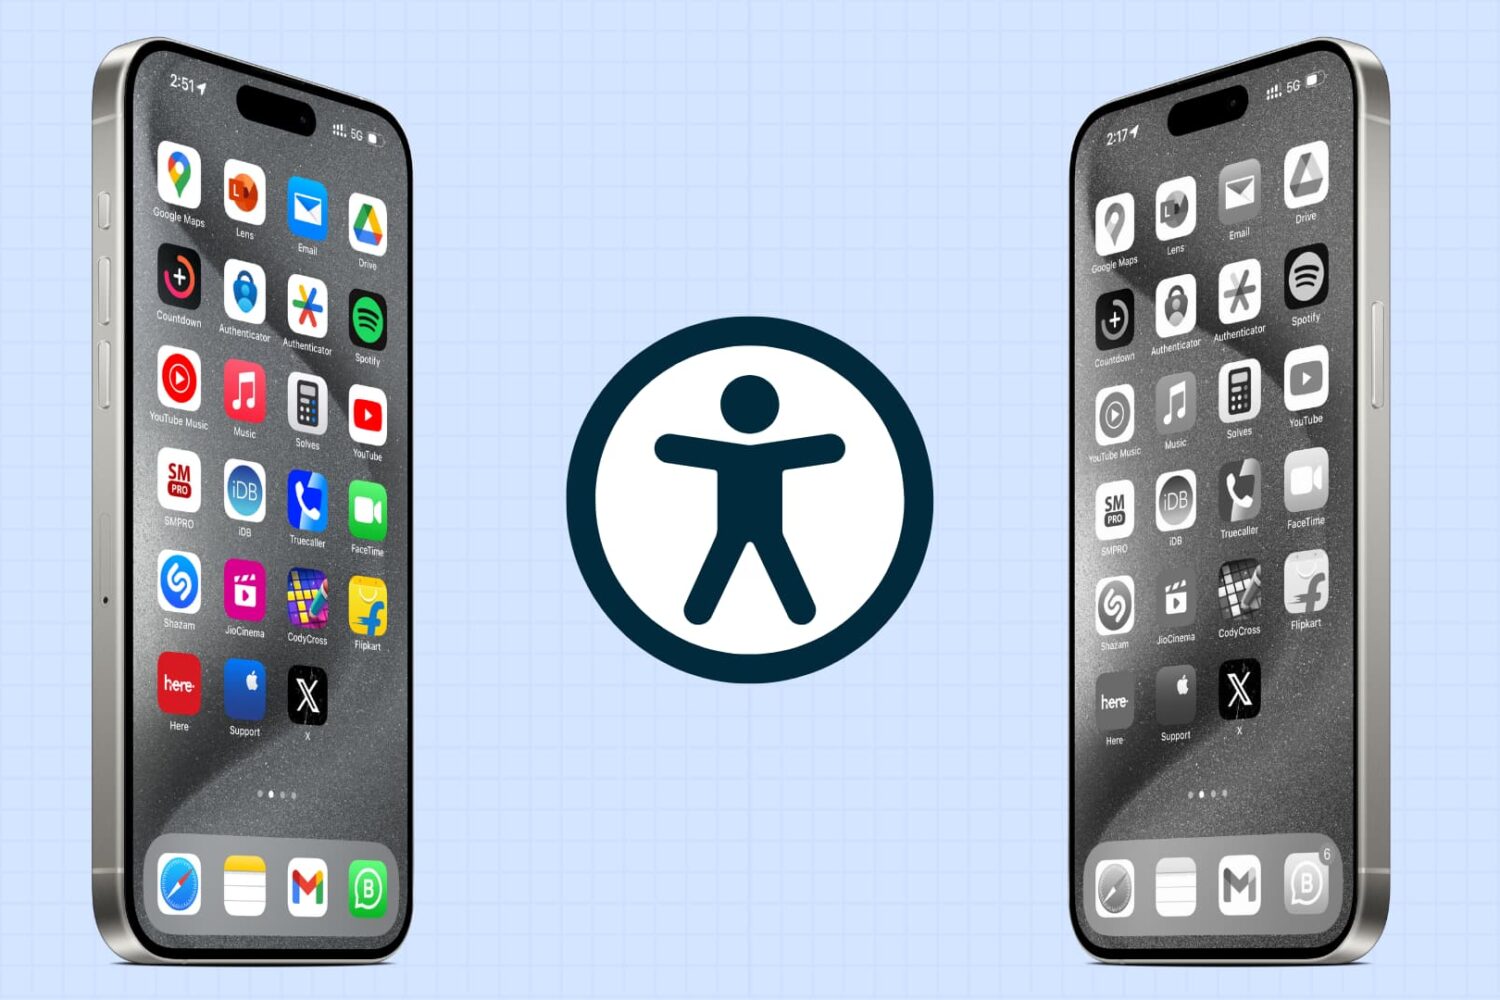 iPhone Accessibility features